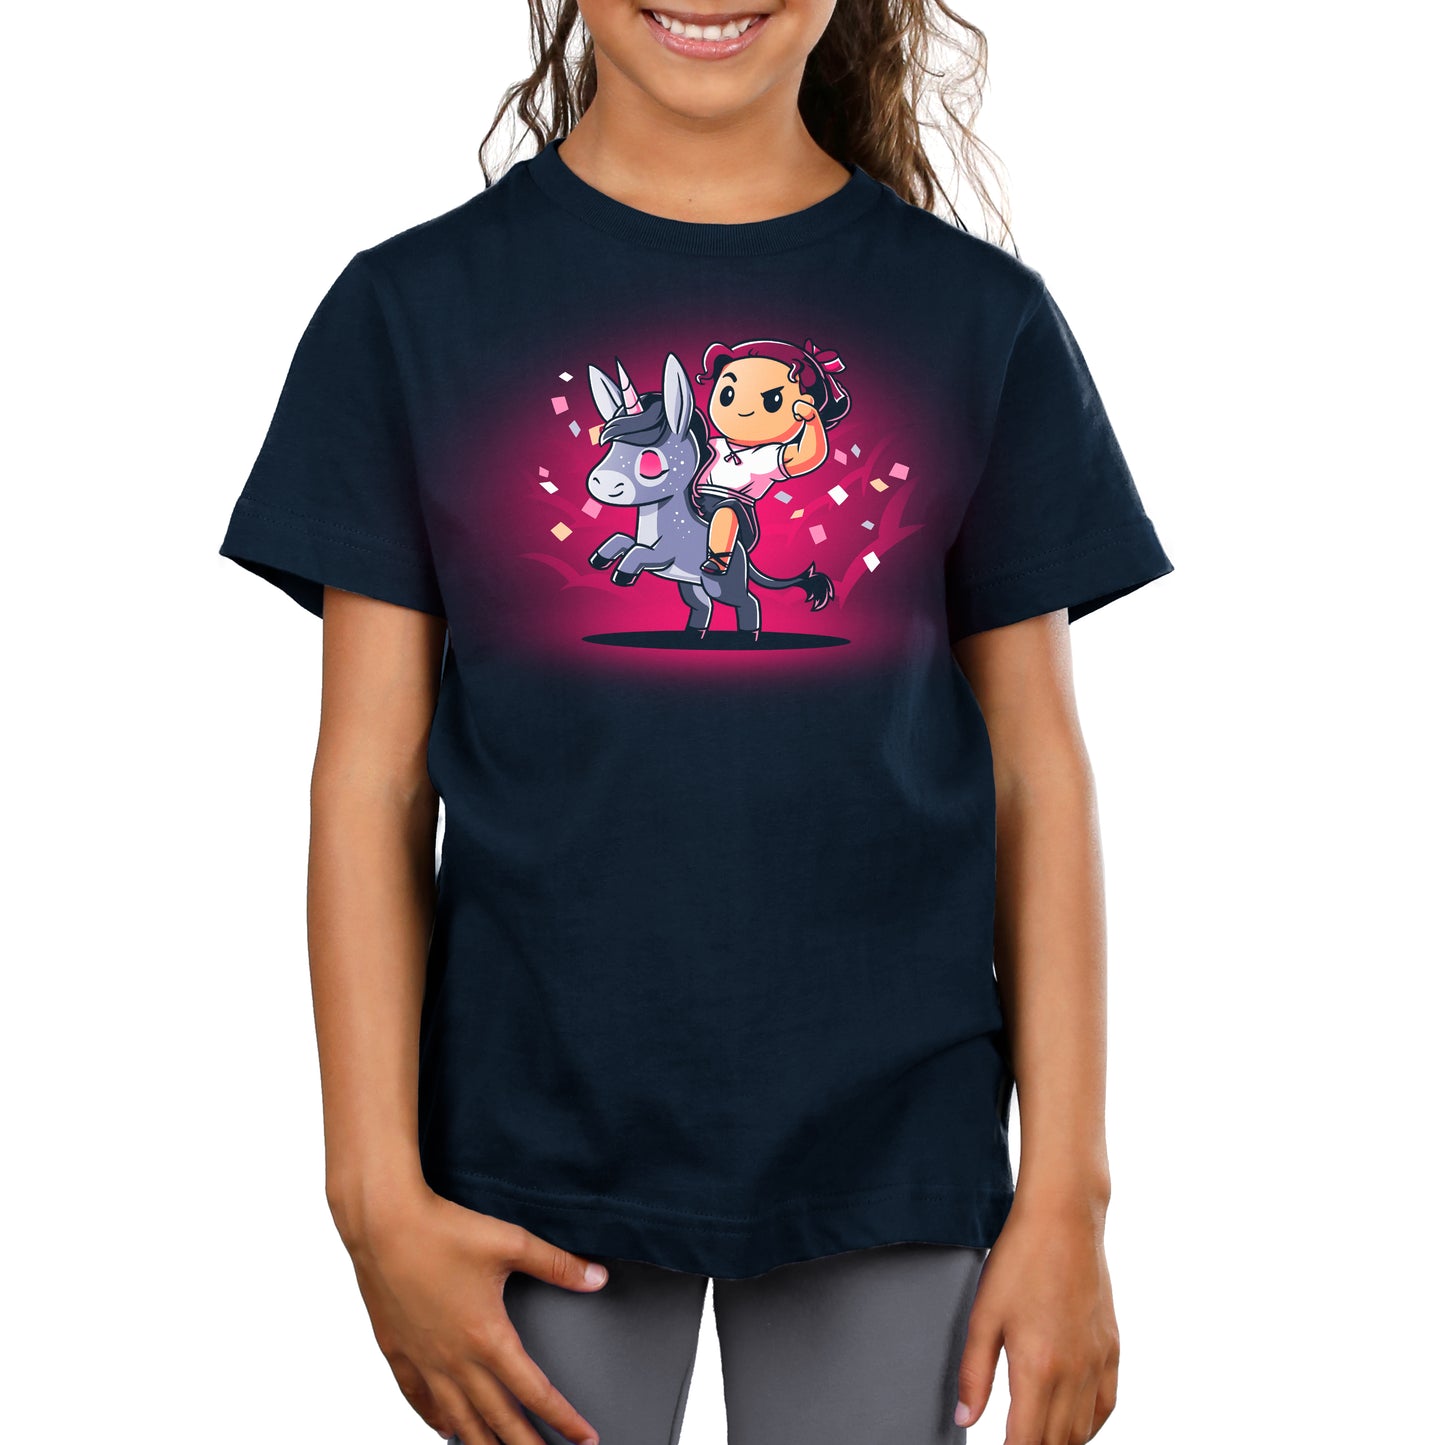 A girl wearing an Epic Luisa navy blue unisex tee with an image of a girl and a donkey, made by Disney.